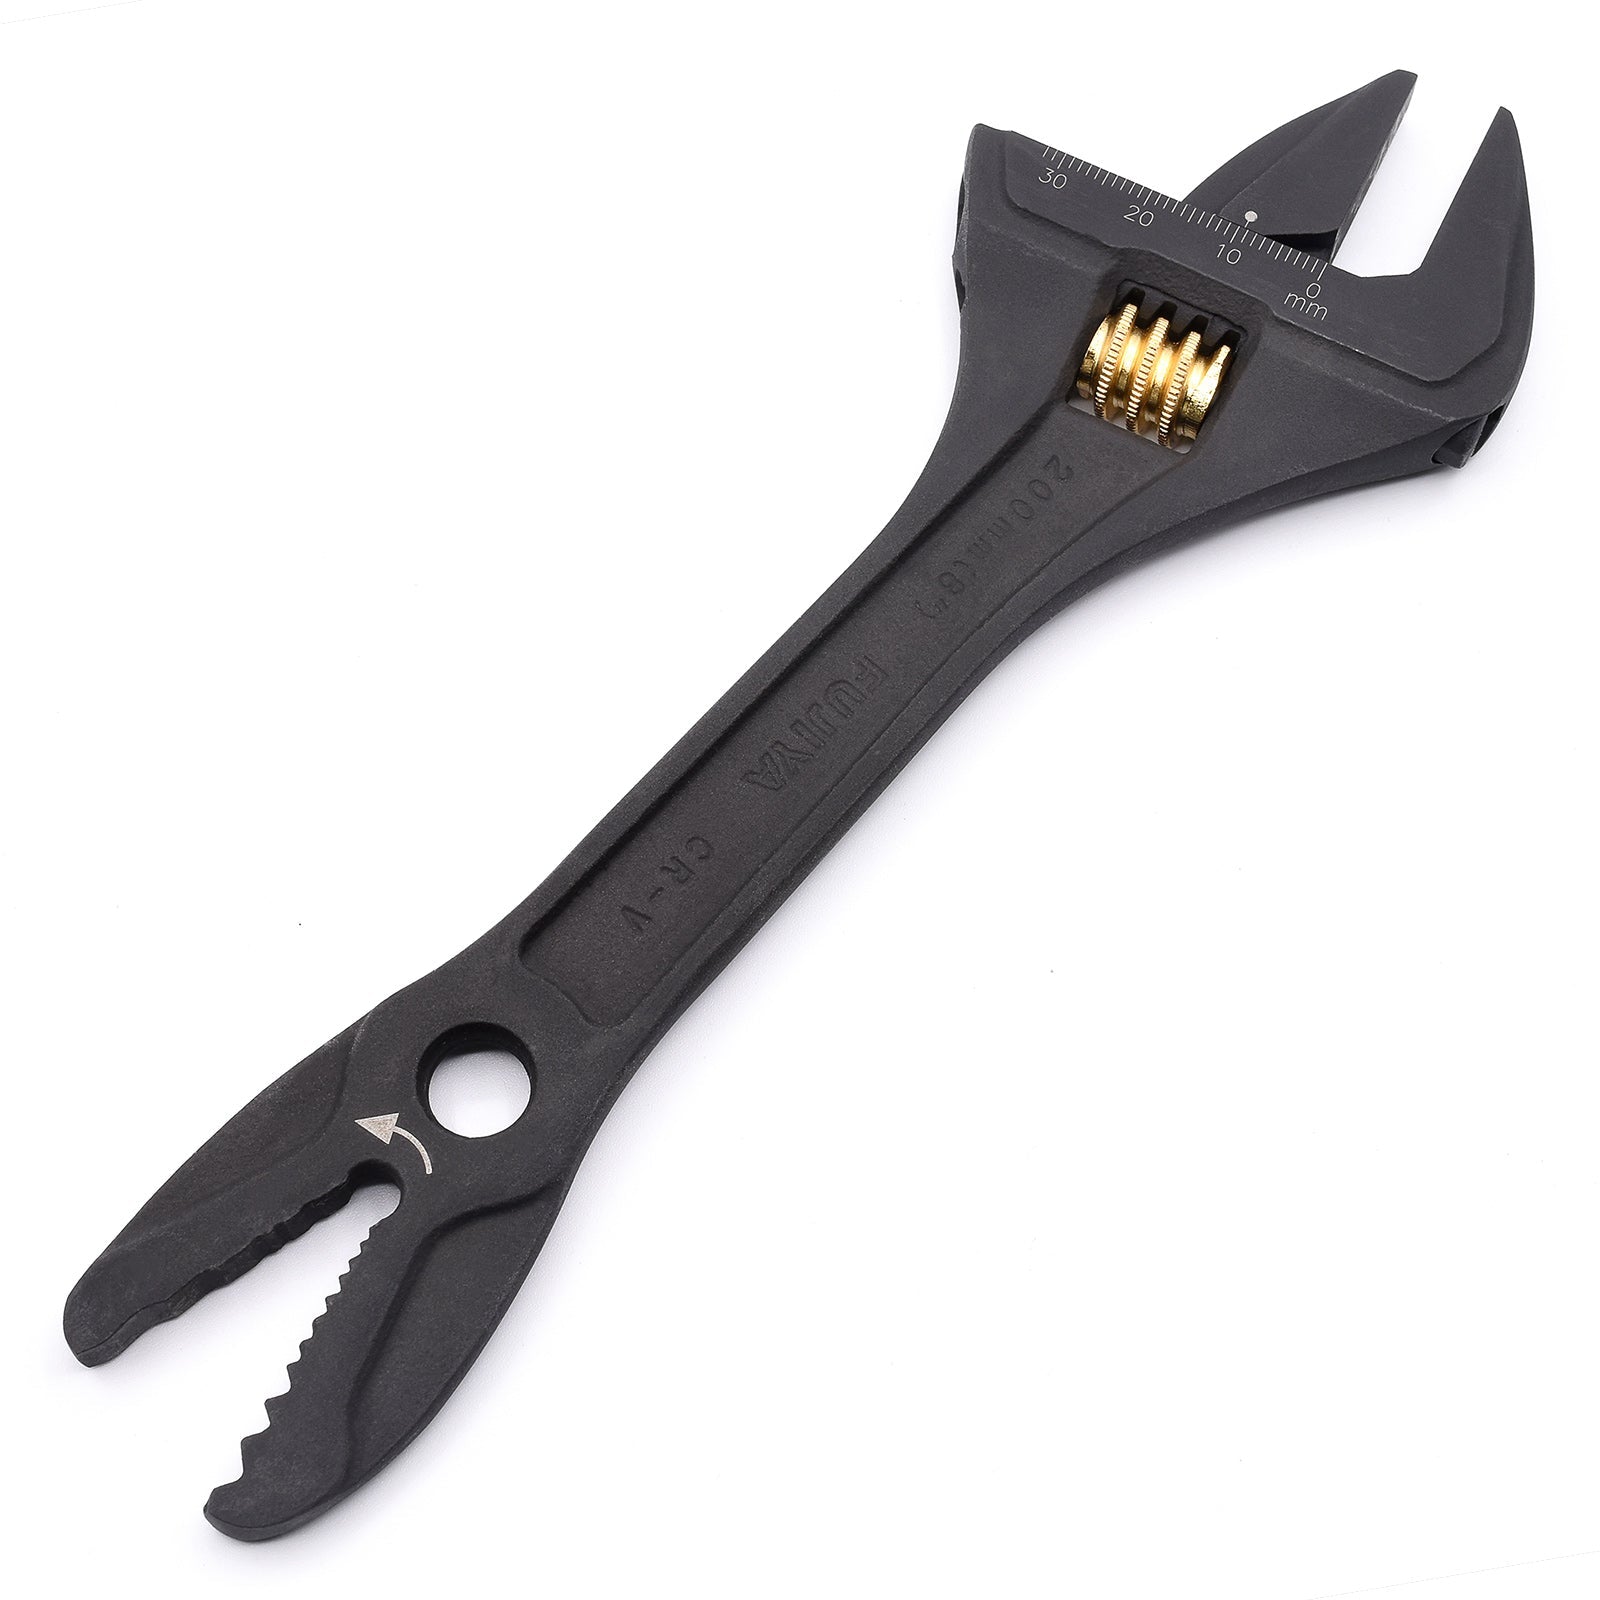 Fujiya 2-in-1 Adjustable Wrench with Quick Alligator Jaw